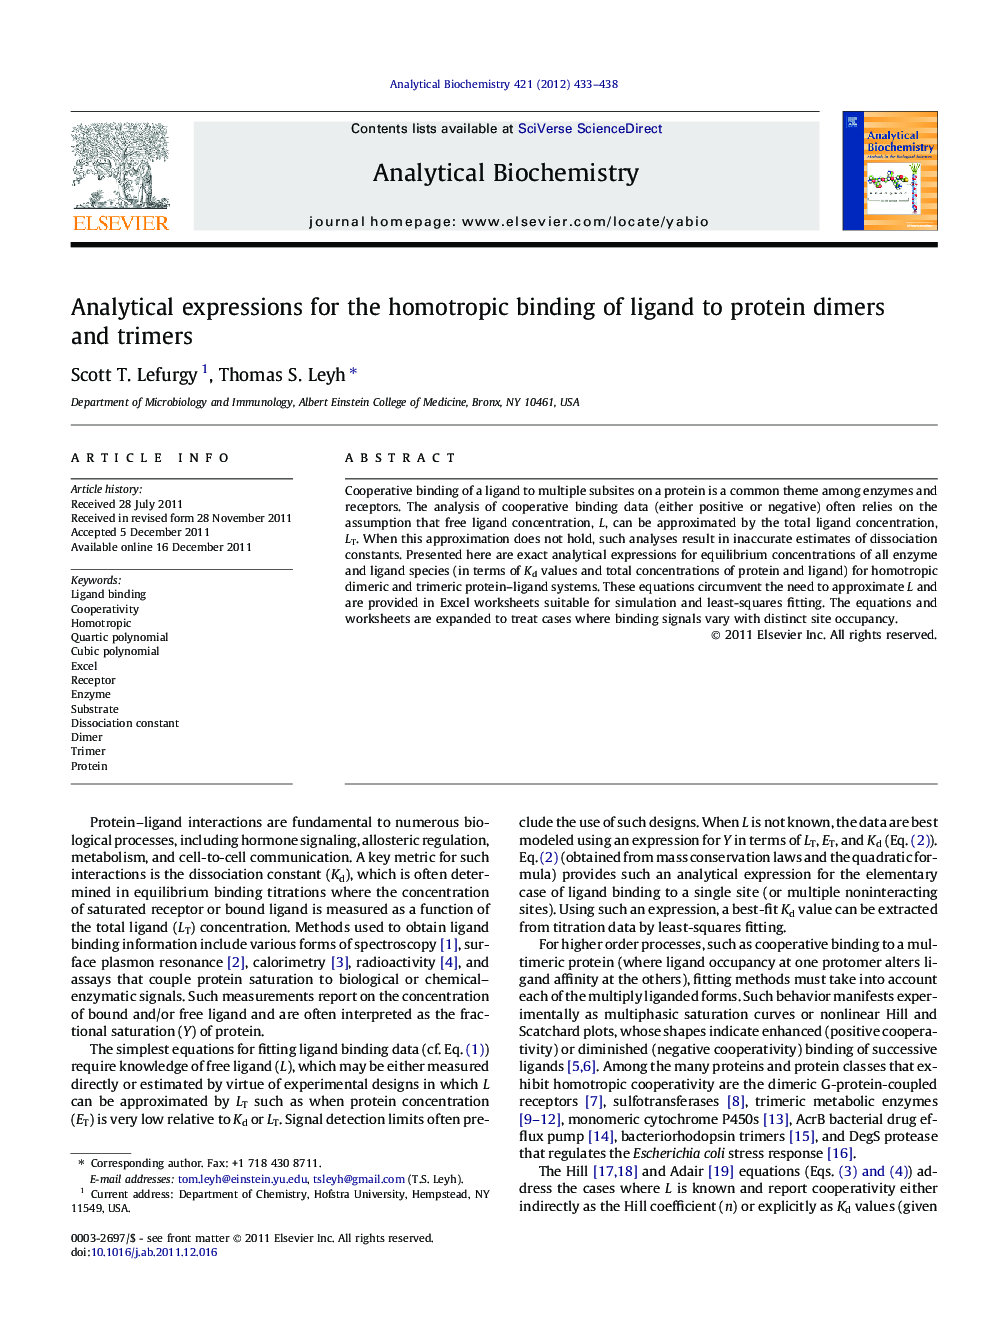 Analytical expressions for the homotropic binding of ligand to protein dimers and trimers